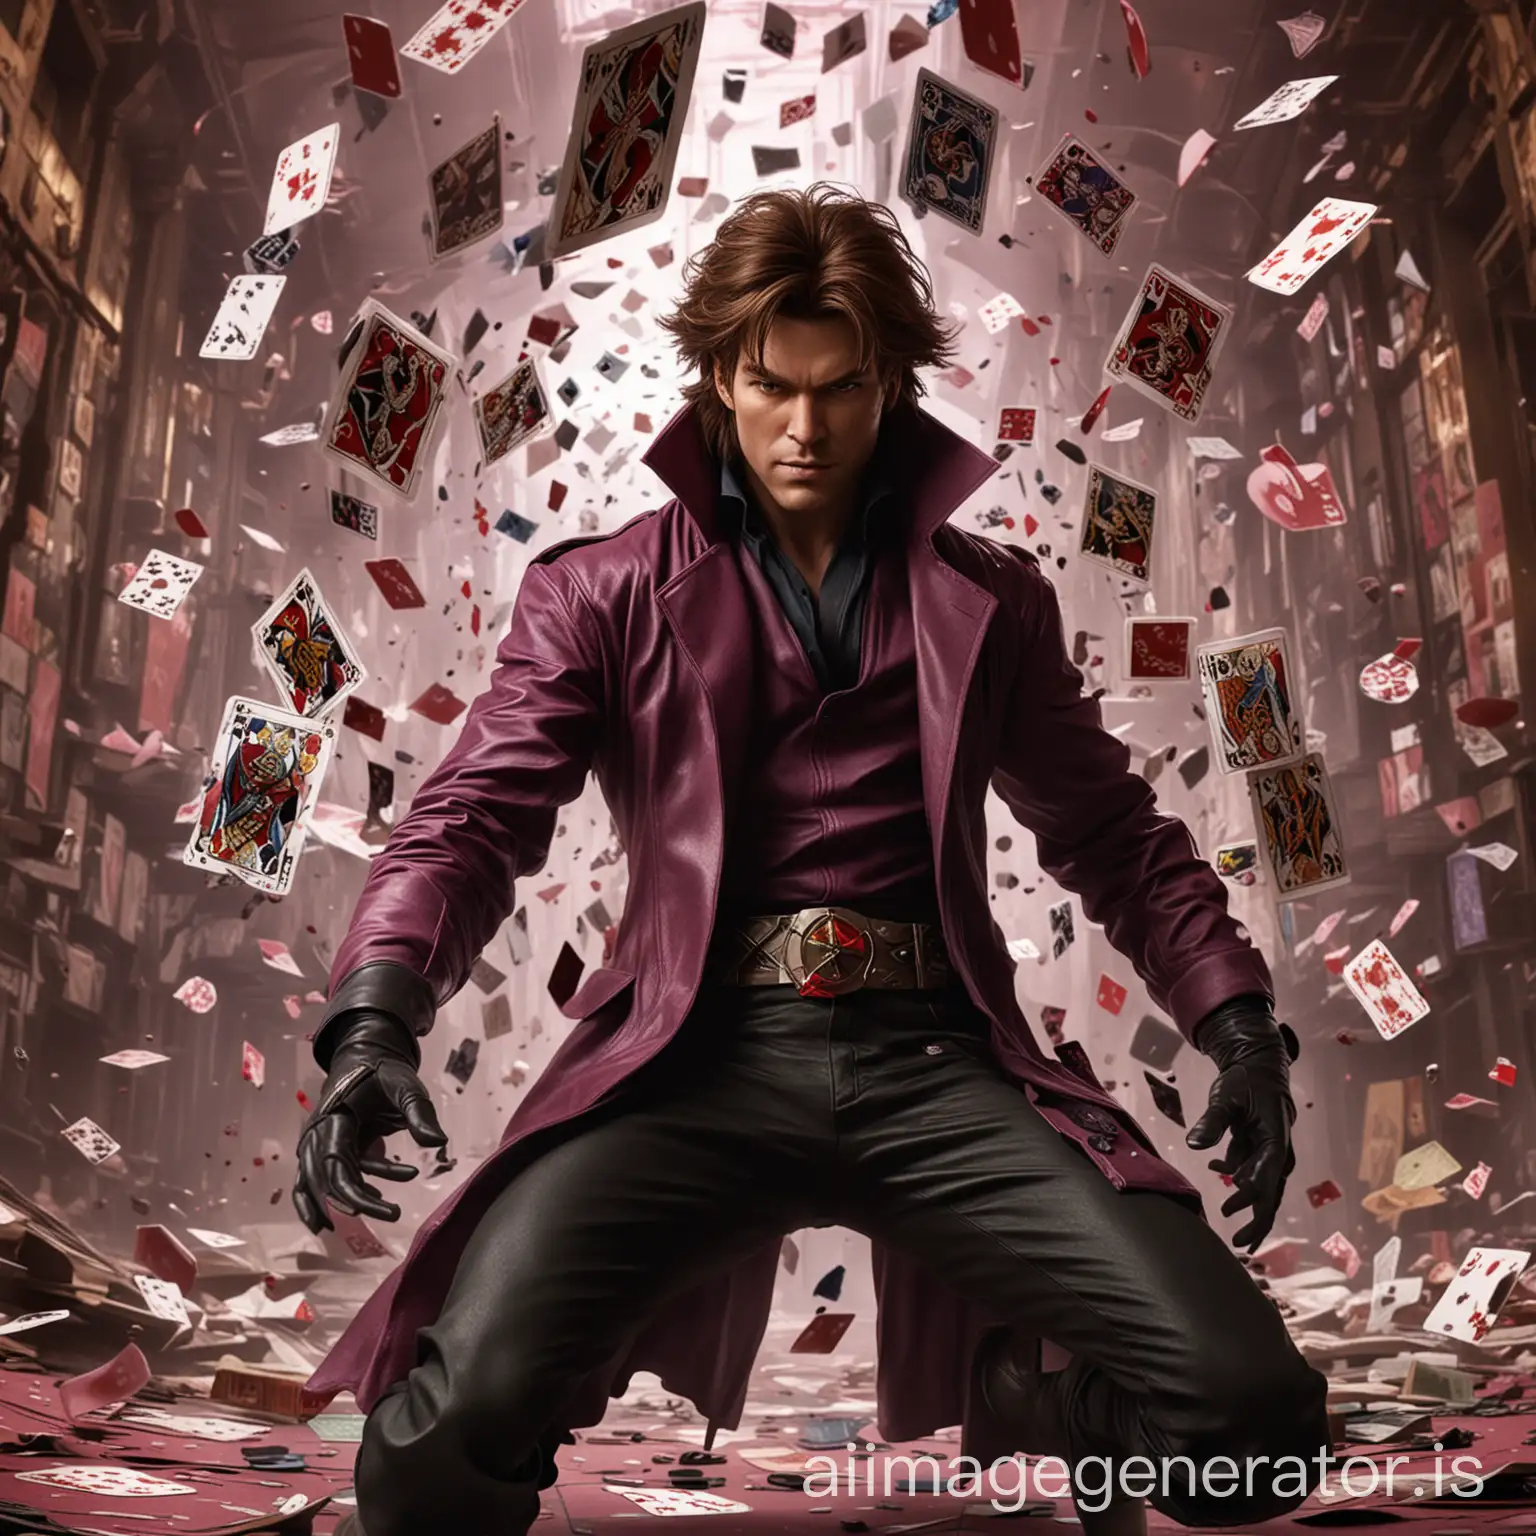 Gambit, a character from the X-Men series, amidst a dynamic backdrop, Surrounding him are playing cards suspended in mid-air, with some near his head, others at his feet, and several more in the background